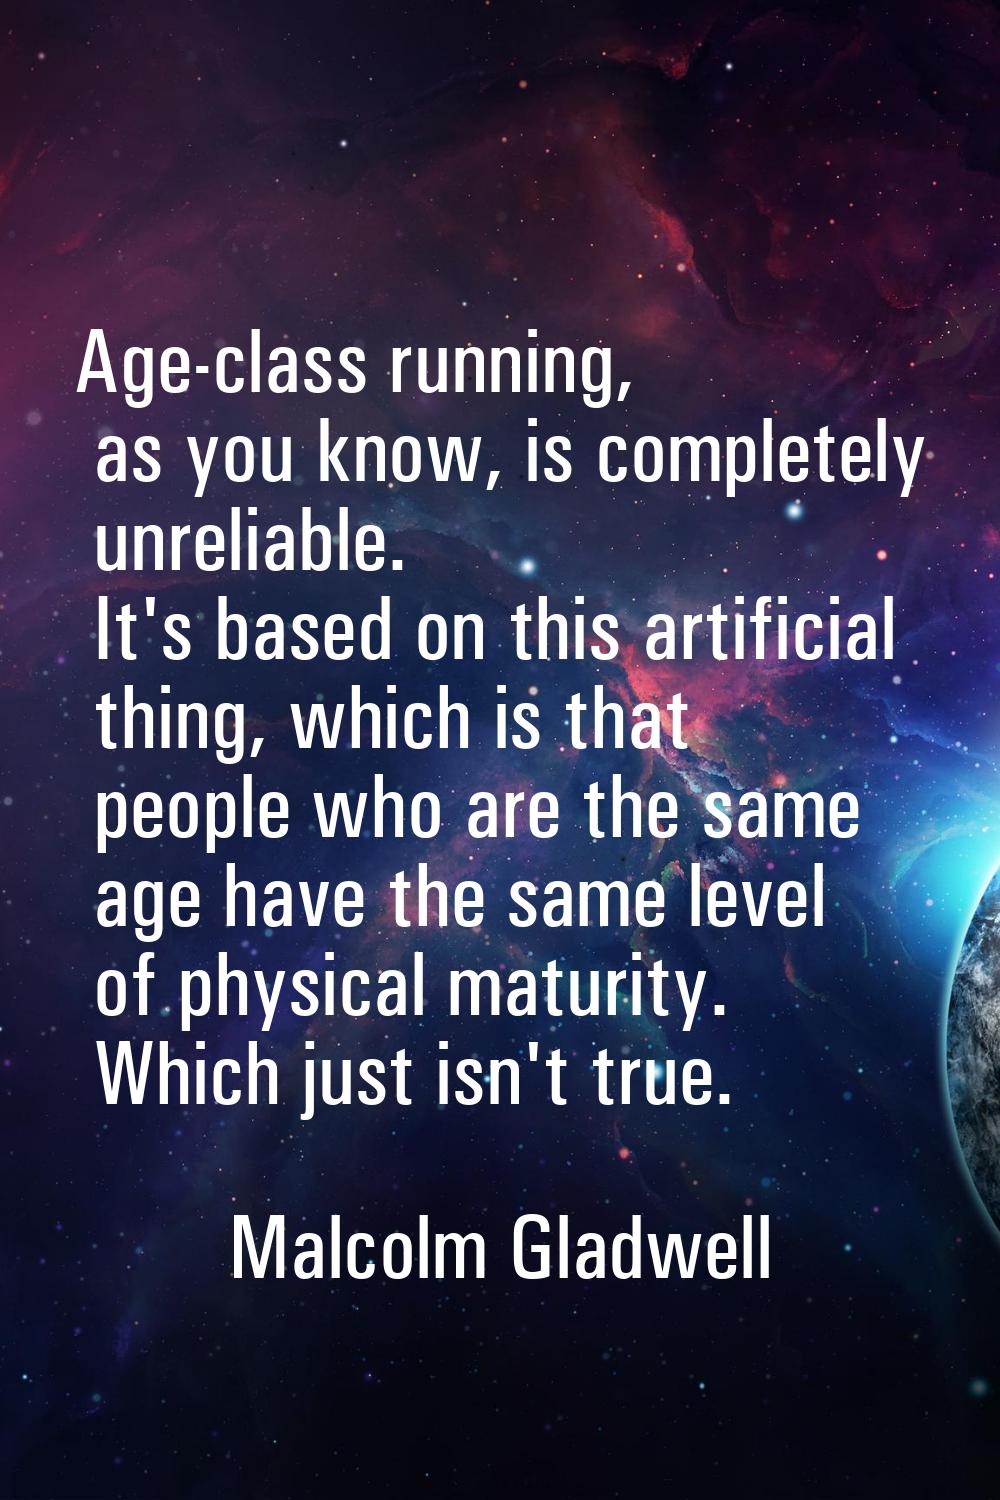 Age-class running, as you know, is completely unreliable. It's based on this artificial thing, whic